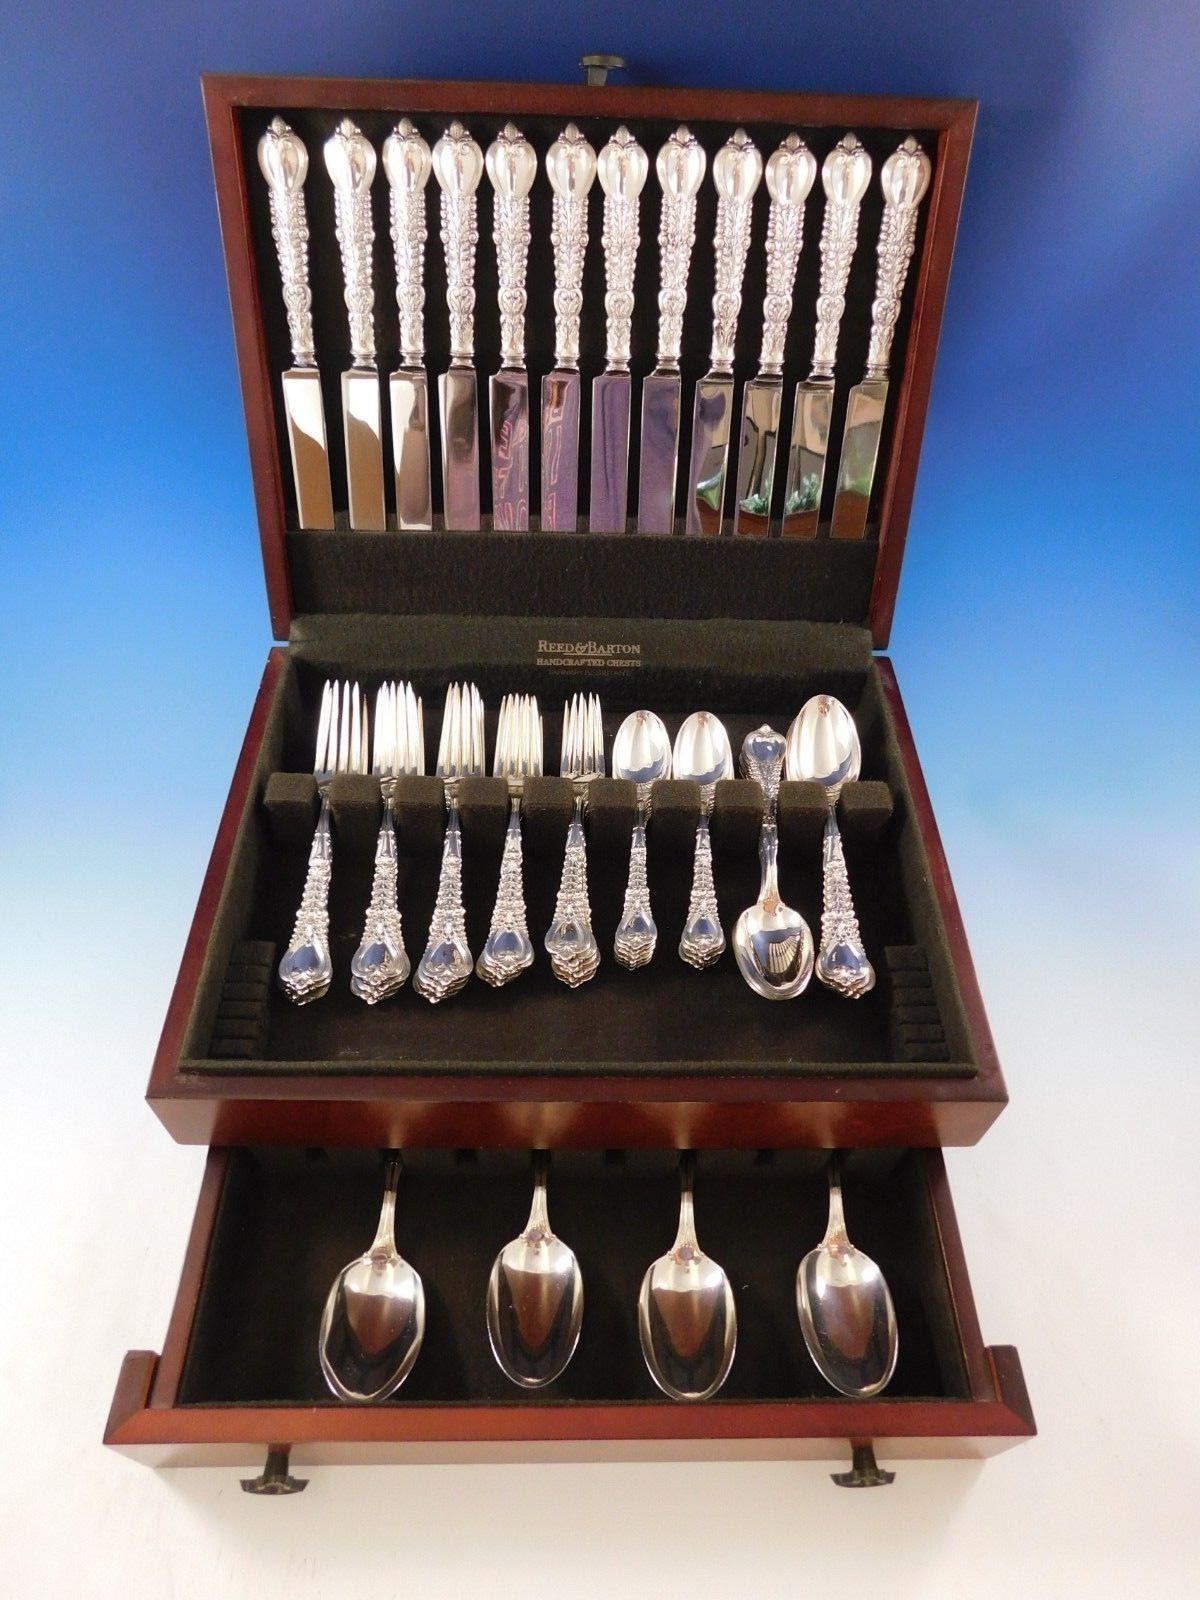 Stunning florentine by Tiffany & Co. sterling silver flatware set, 64 pieces. This set includes:

12 dinner size knives, 10 1/2